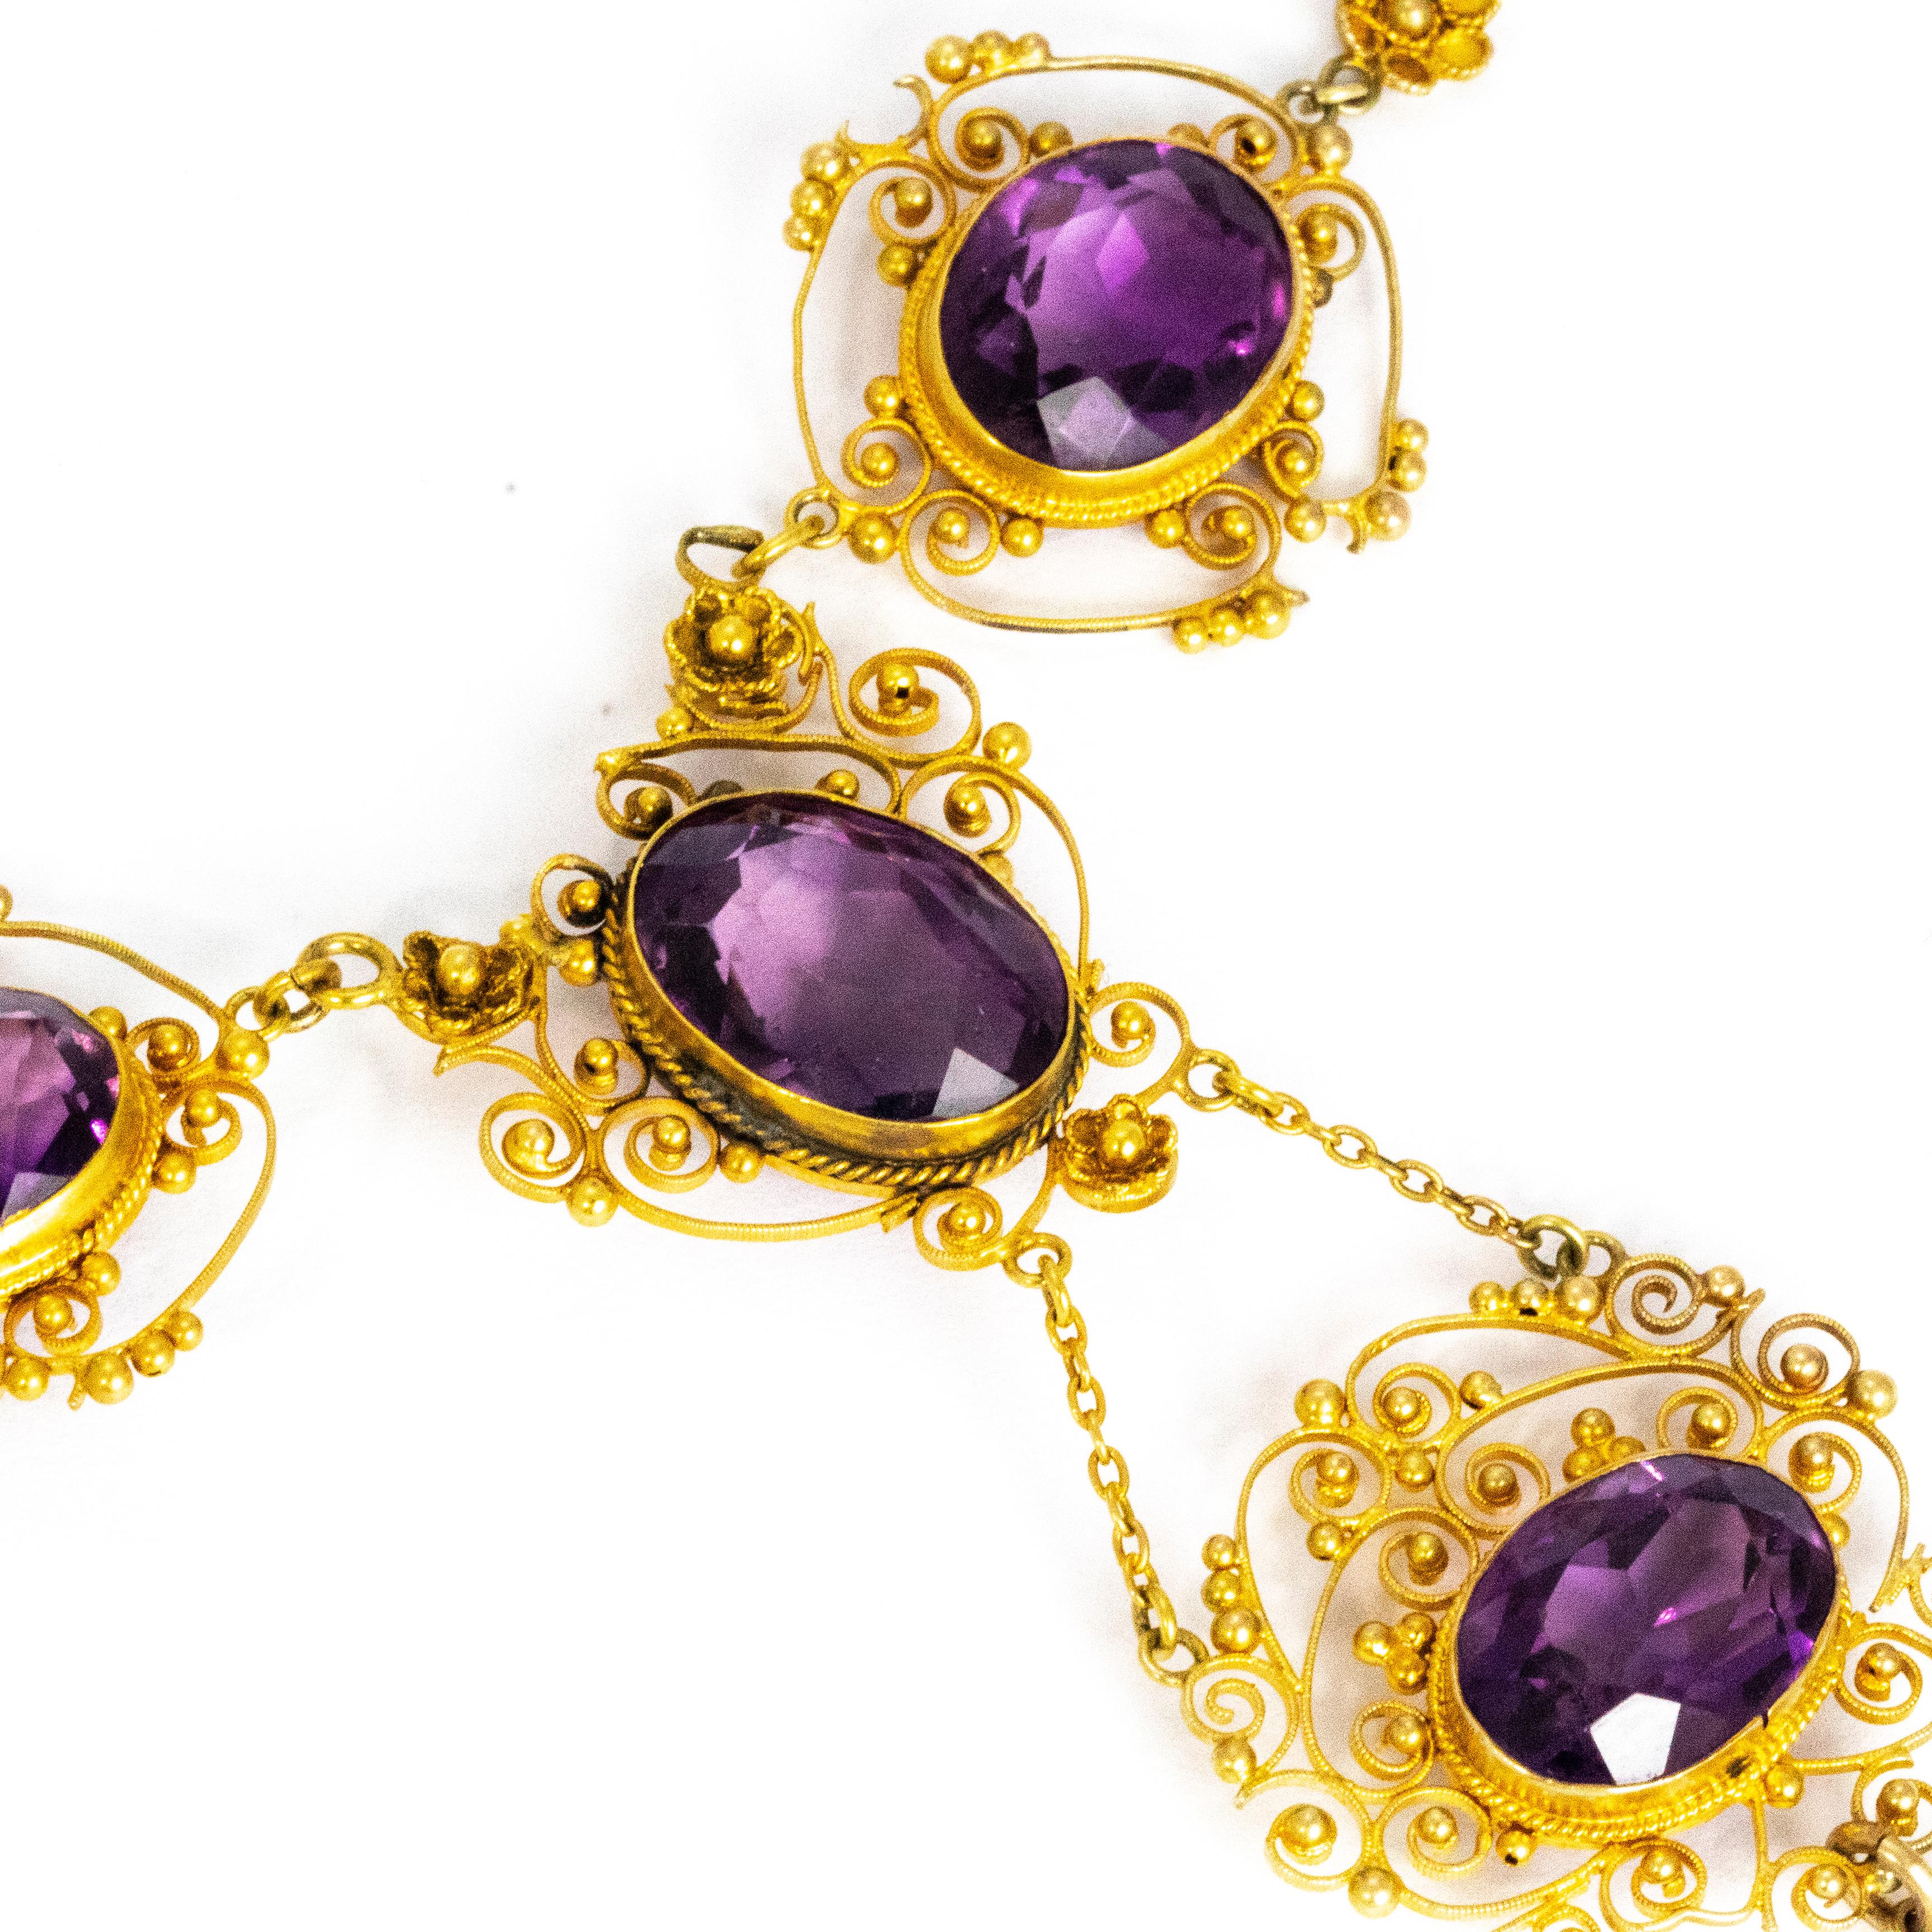 This fabulous filagree work necklace holds five good sized amethysts, four are oval and one of which is a tear drop shape. This piece is exquisite, each setting has delicate scroll, beaded and tiny flower details all modelled in 15ct gold. All the